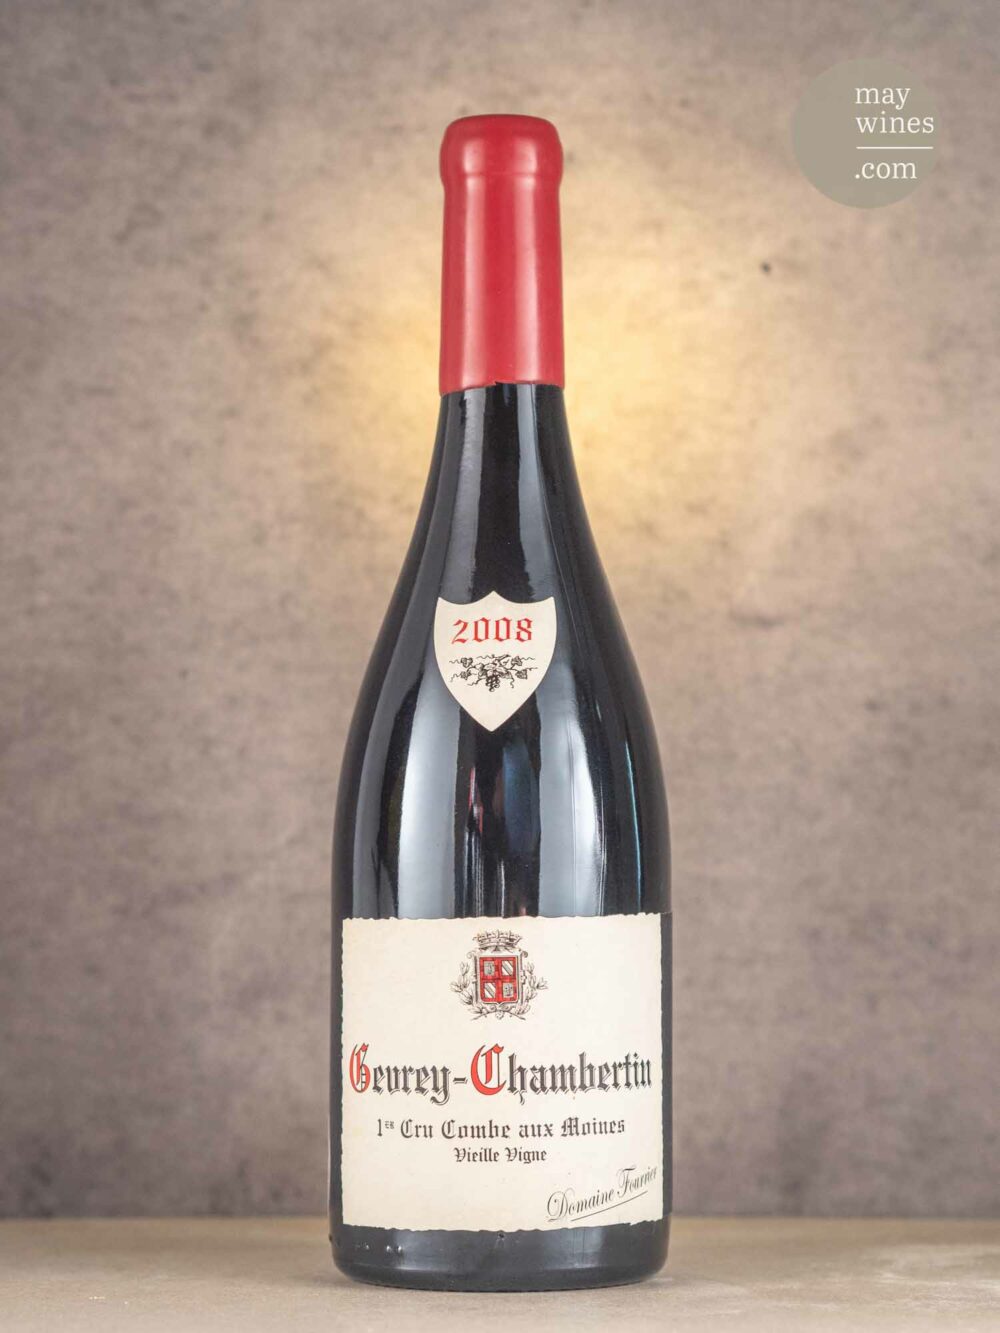 May Wines – Rotwein – 2008 Gevrey-Chambertin Combe aux Moines V. V. Premier Cru - Domaine Fourrier